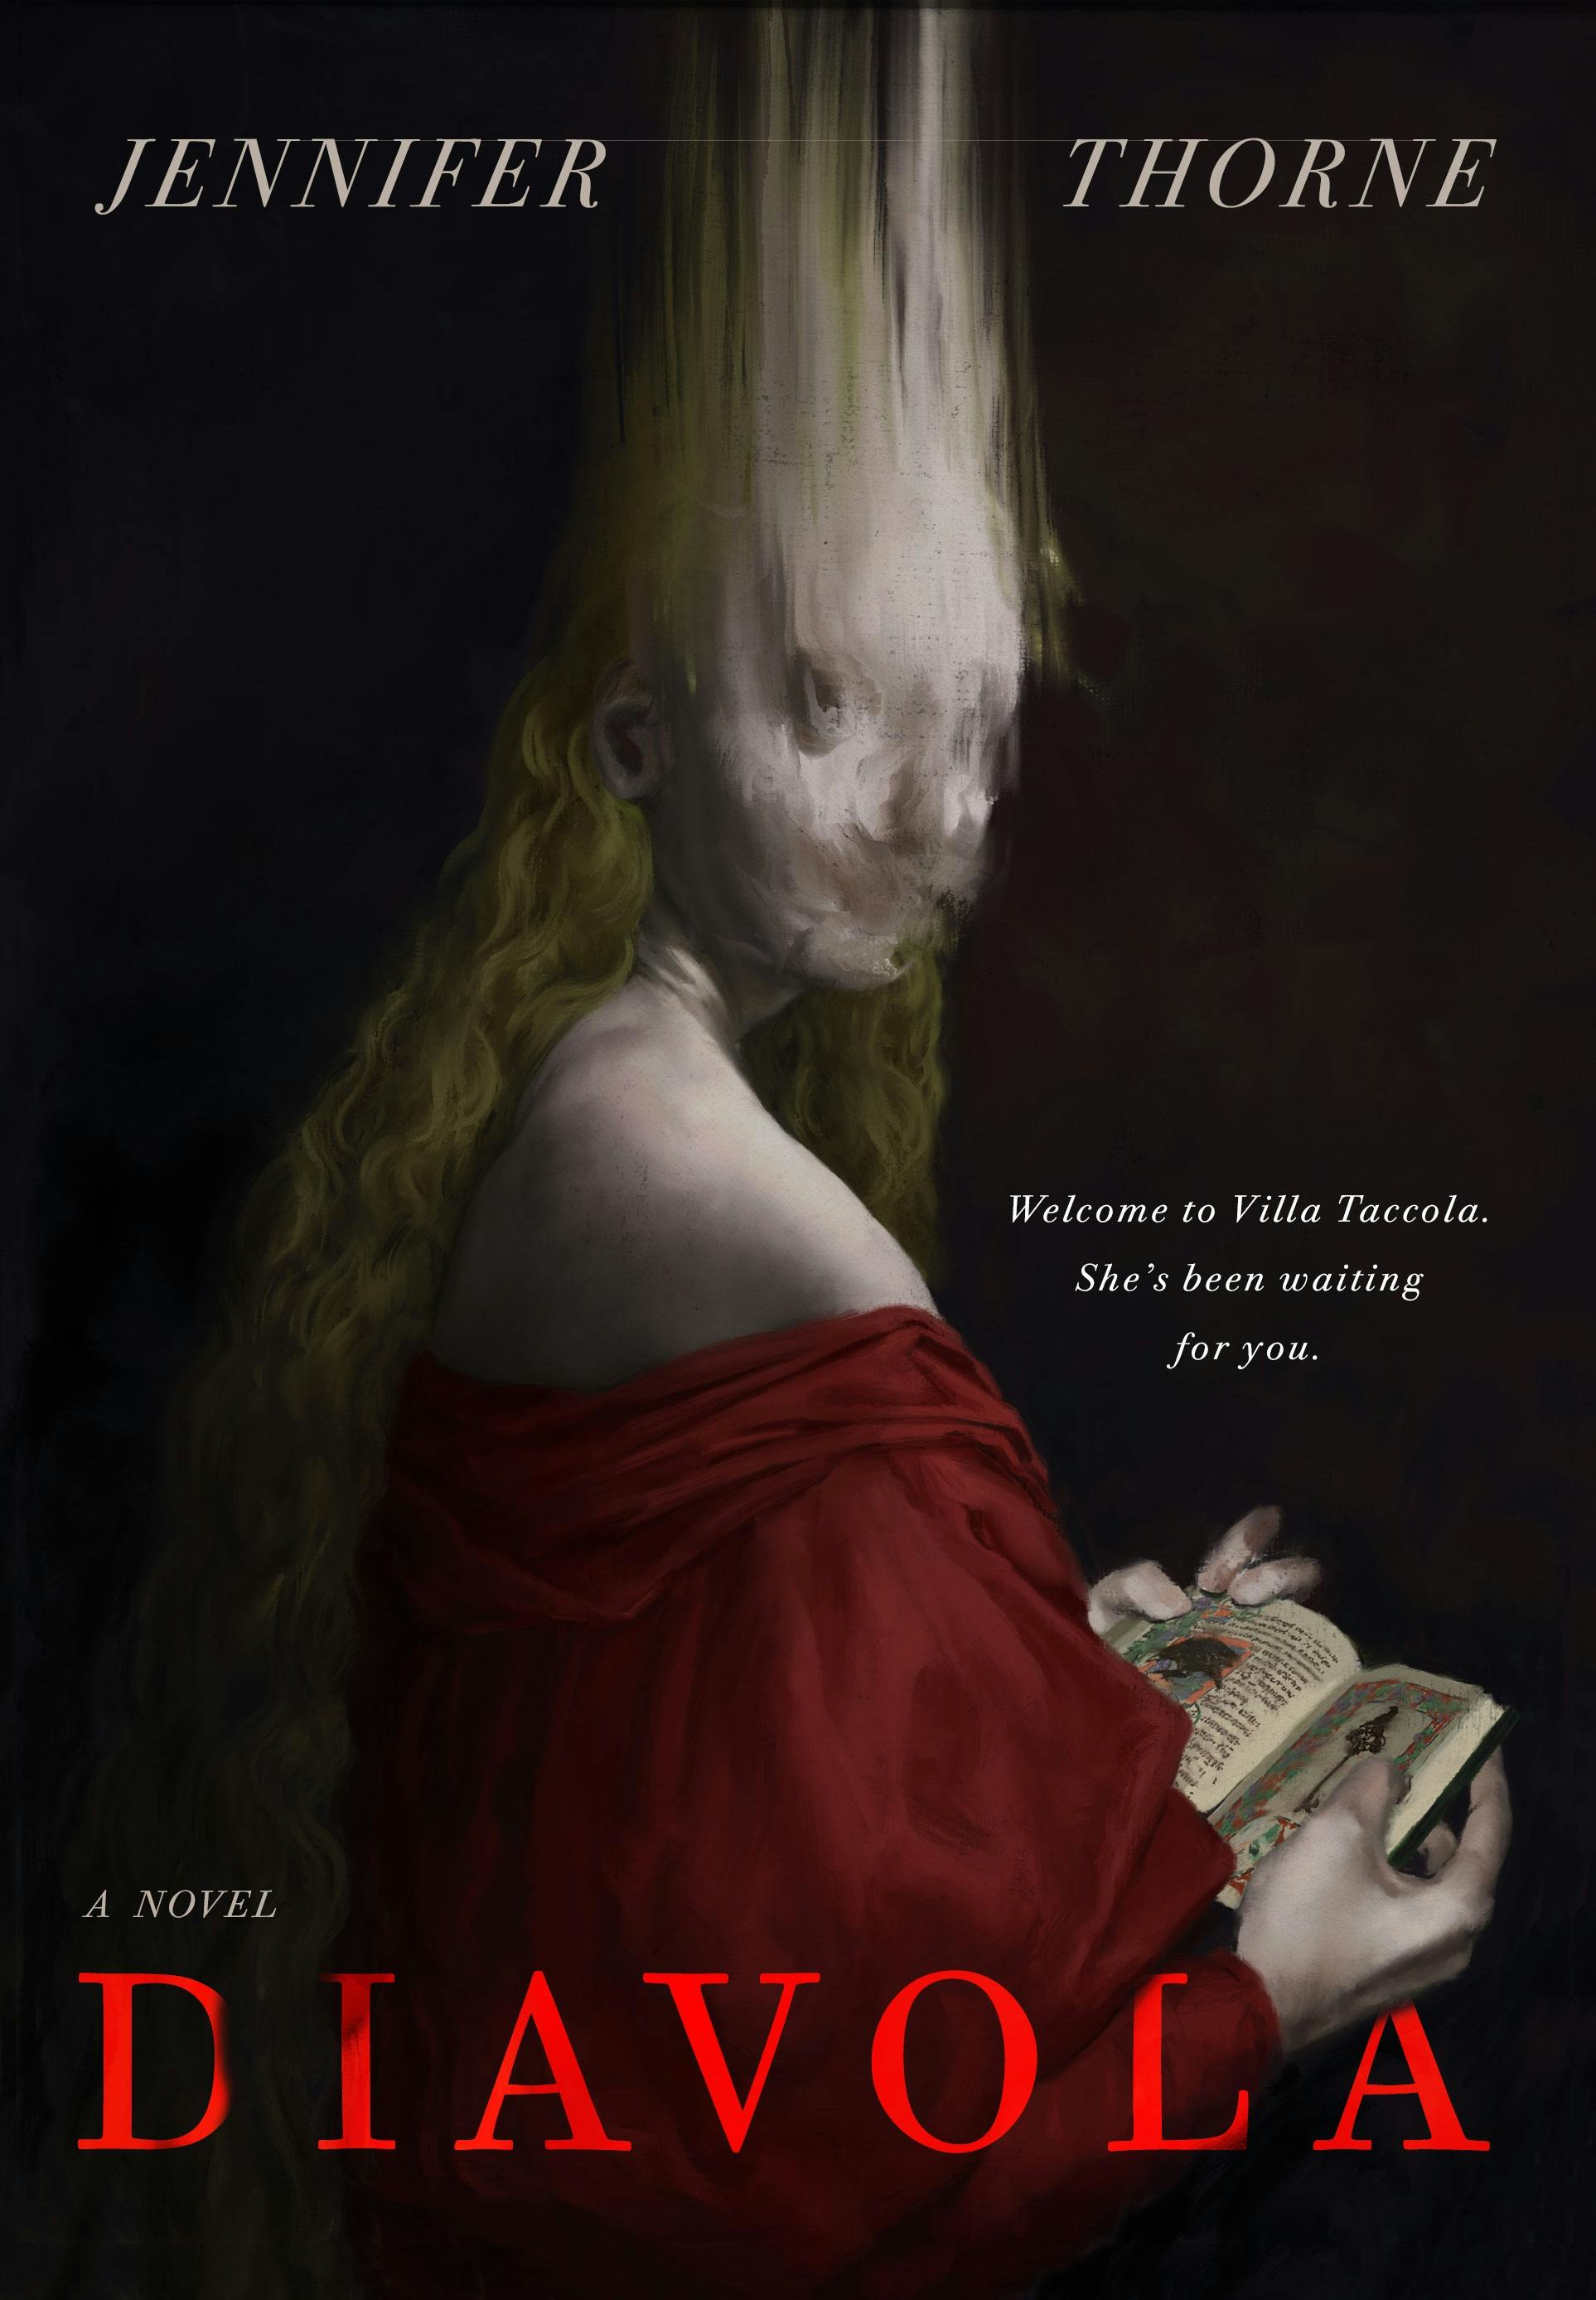 Cover for the book titled as: Diavola